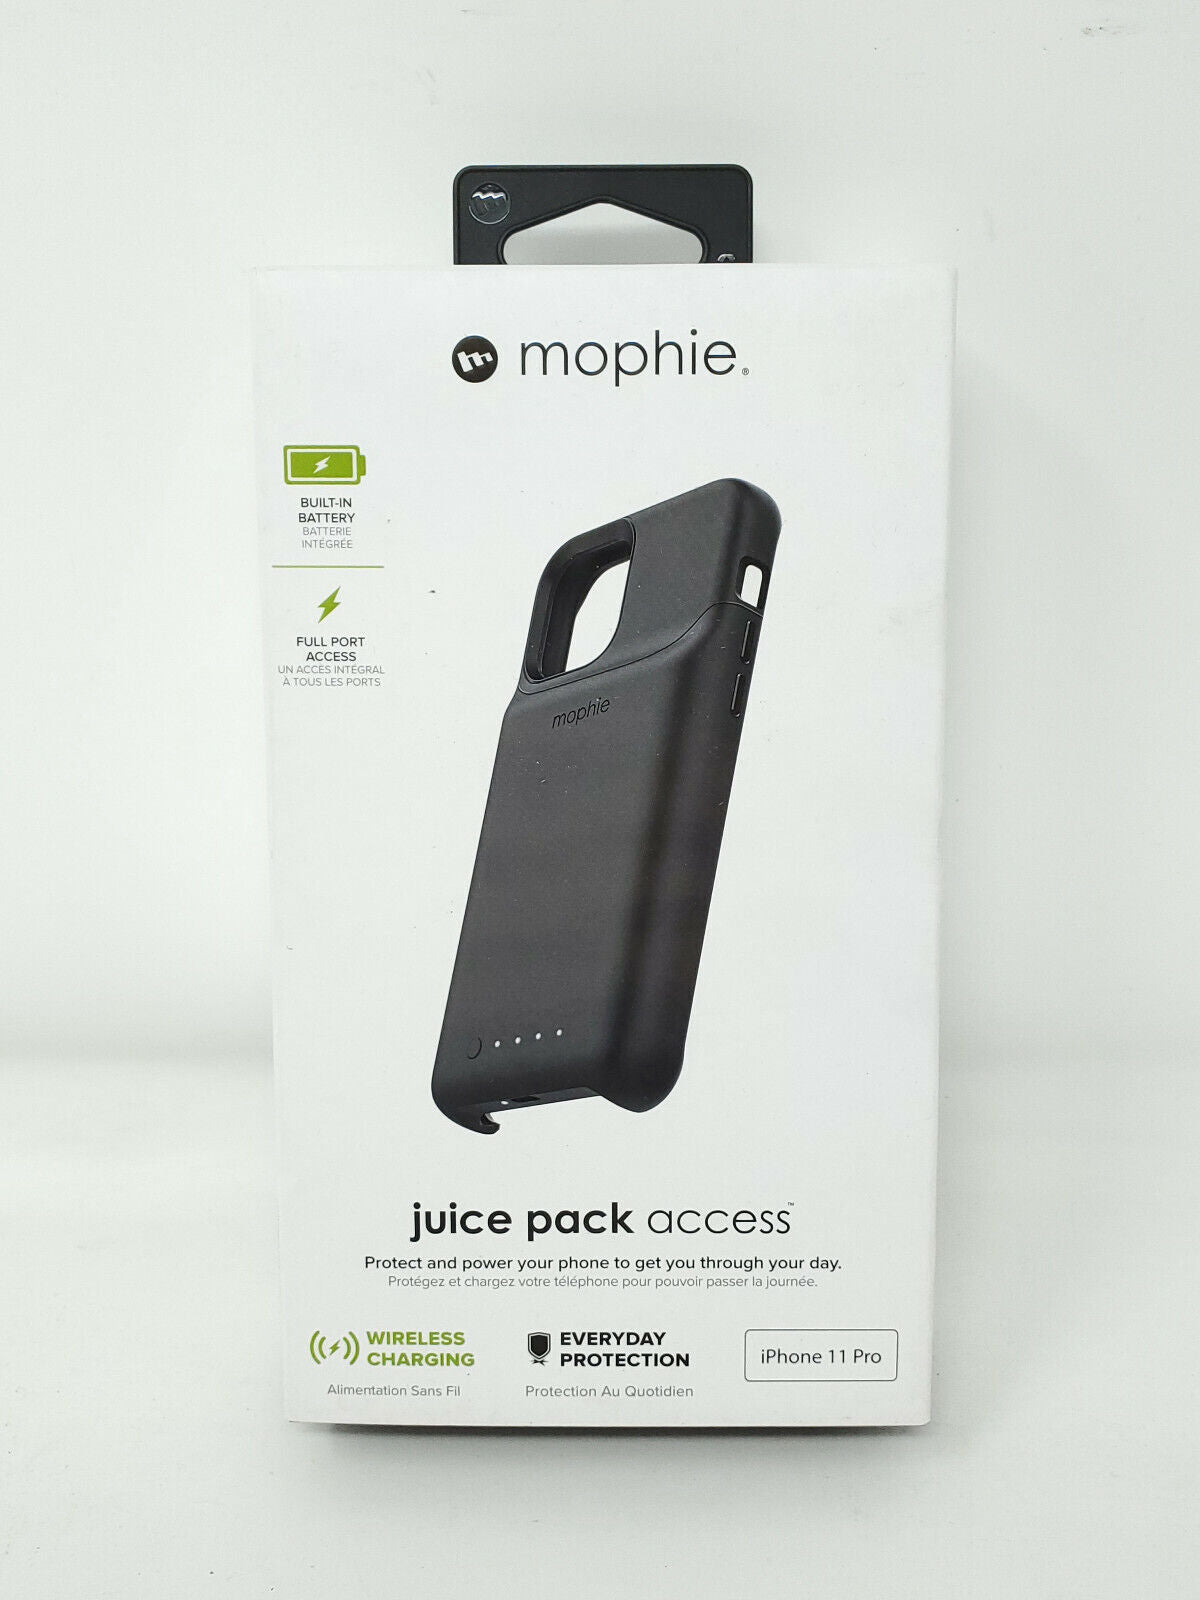 Mophie Juice Pack Access for iPhone 11 Pro 5.8" - Black - New in Box